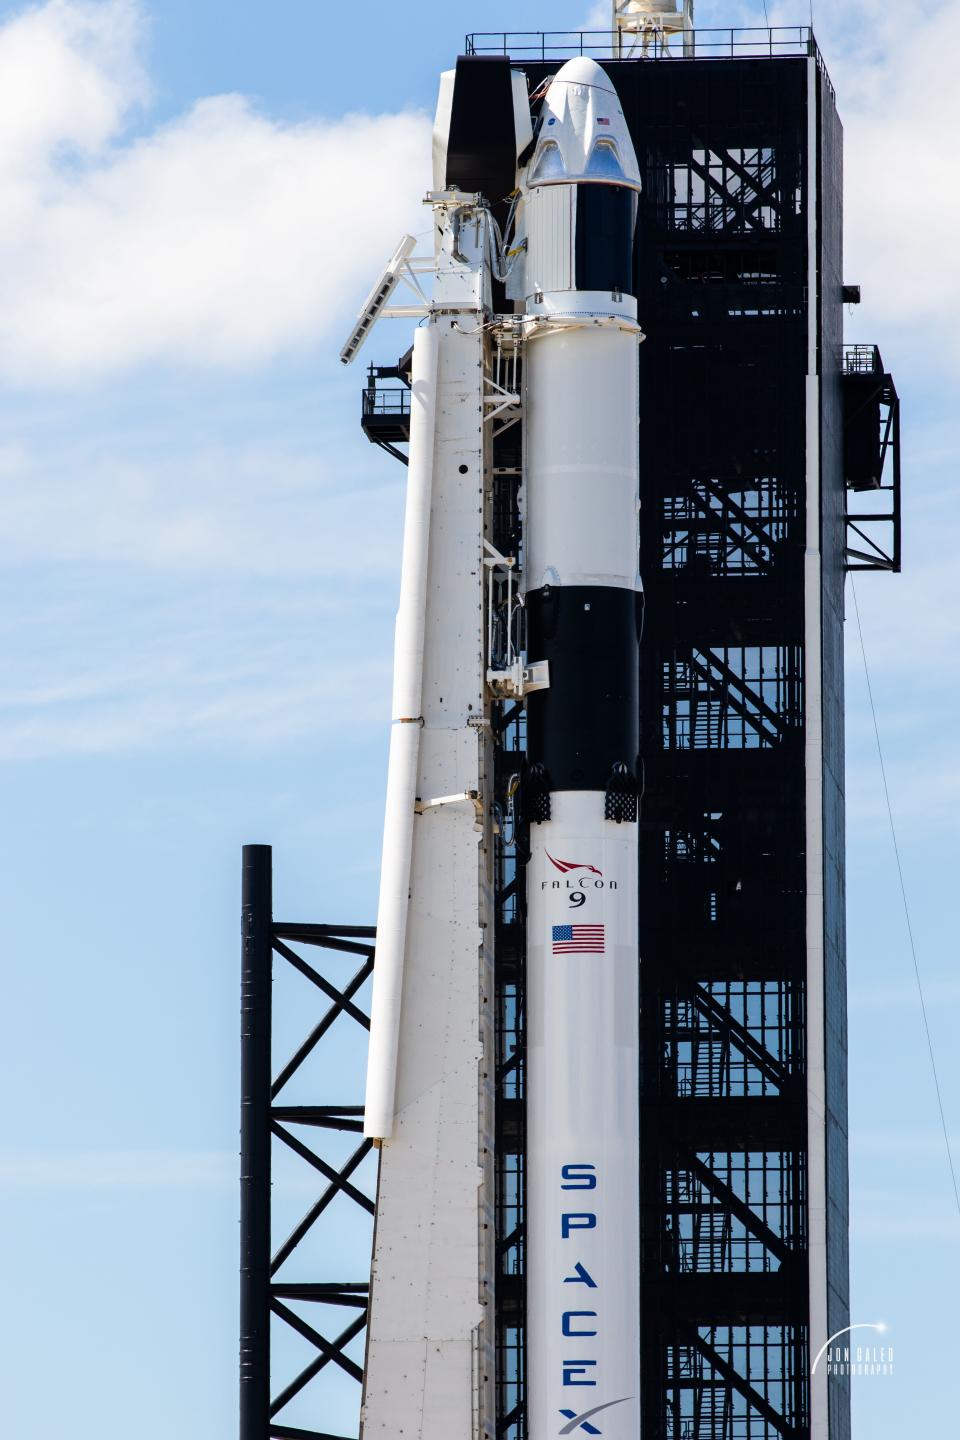 SpaceX Crew Dragon Demo 1 Unmanned Jan 17 2019. 
Picture taken by Jon Galed